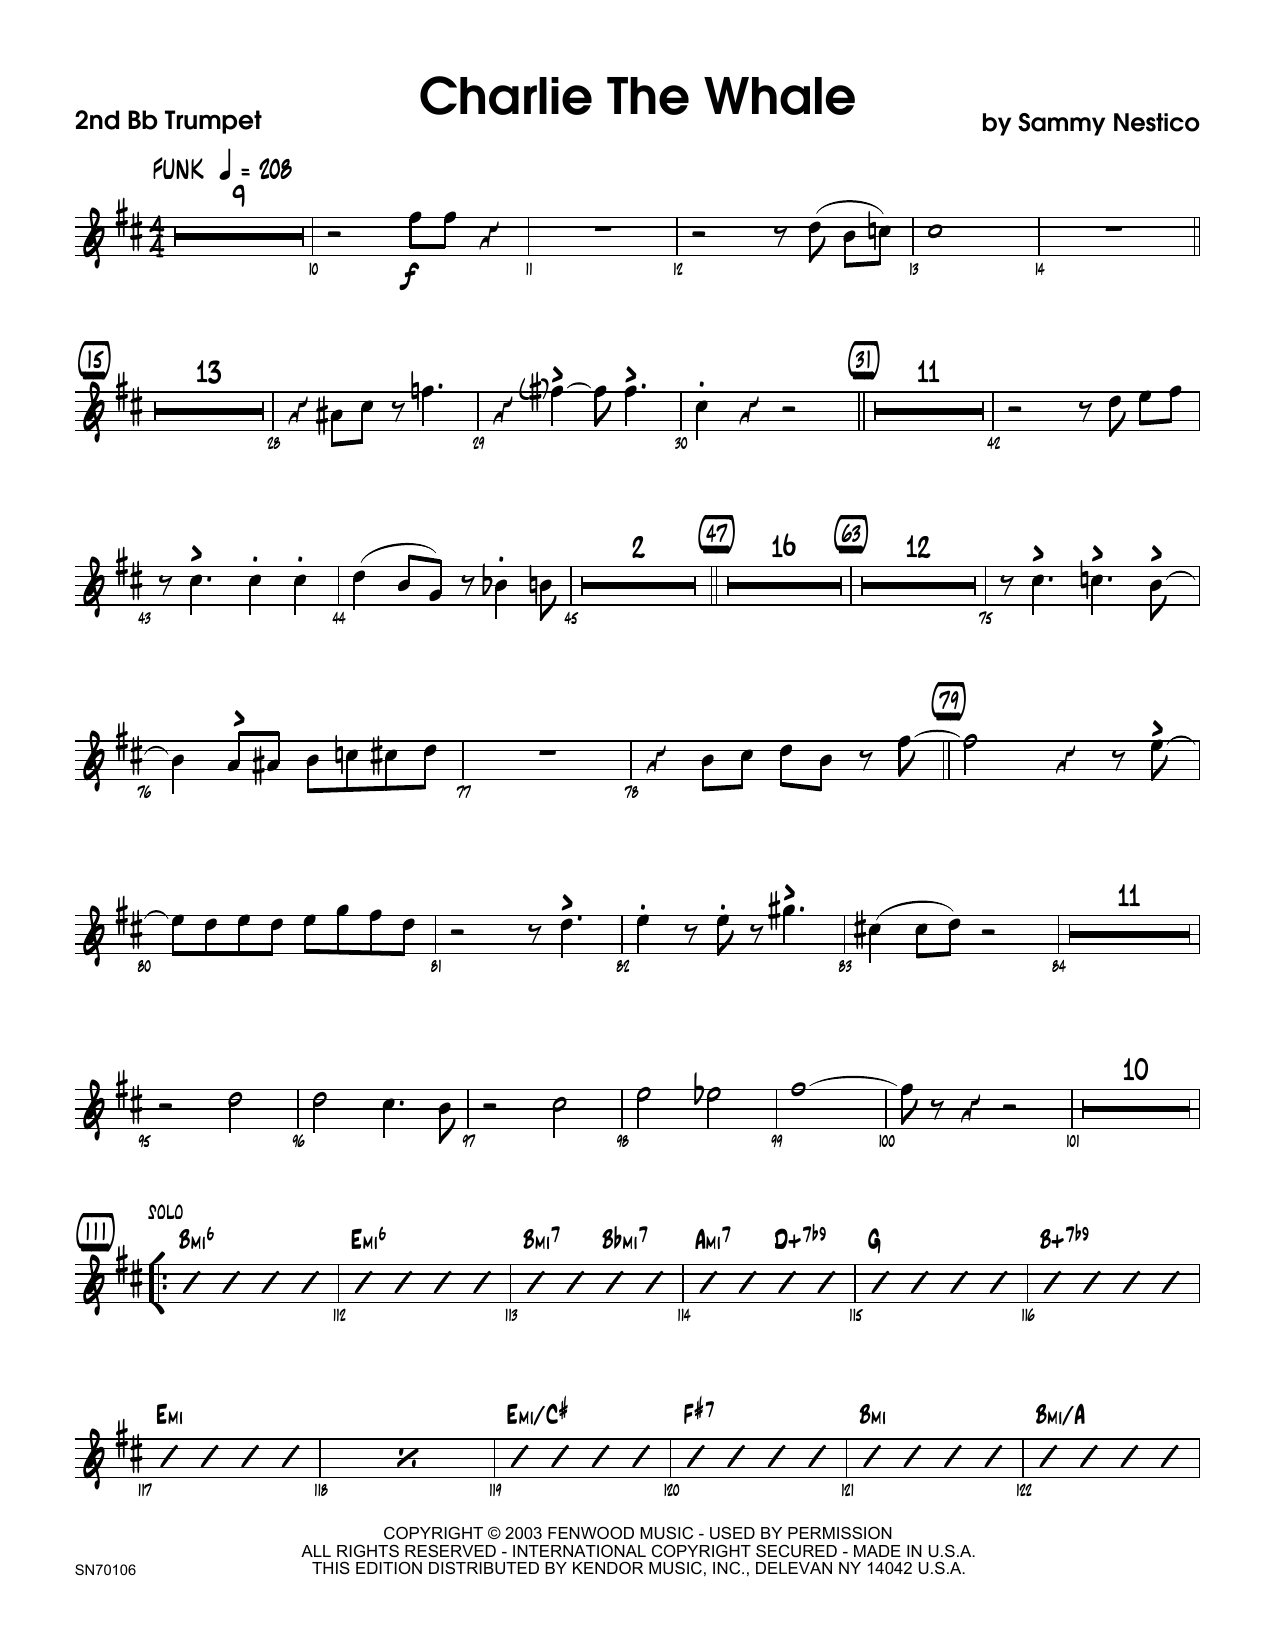 Download Sammy Nestico Charlie The Whale - 2nd Bb Trumpet Sheet Music